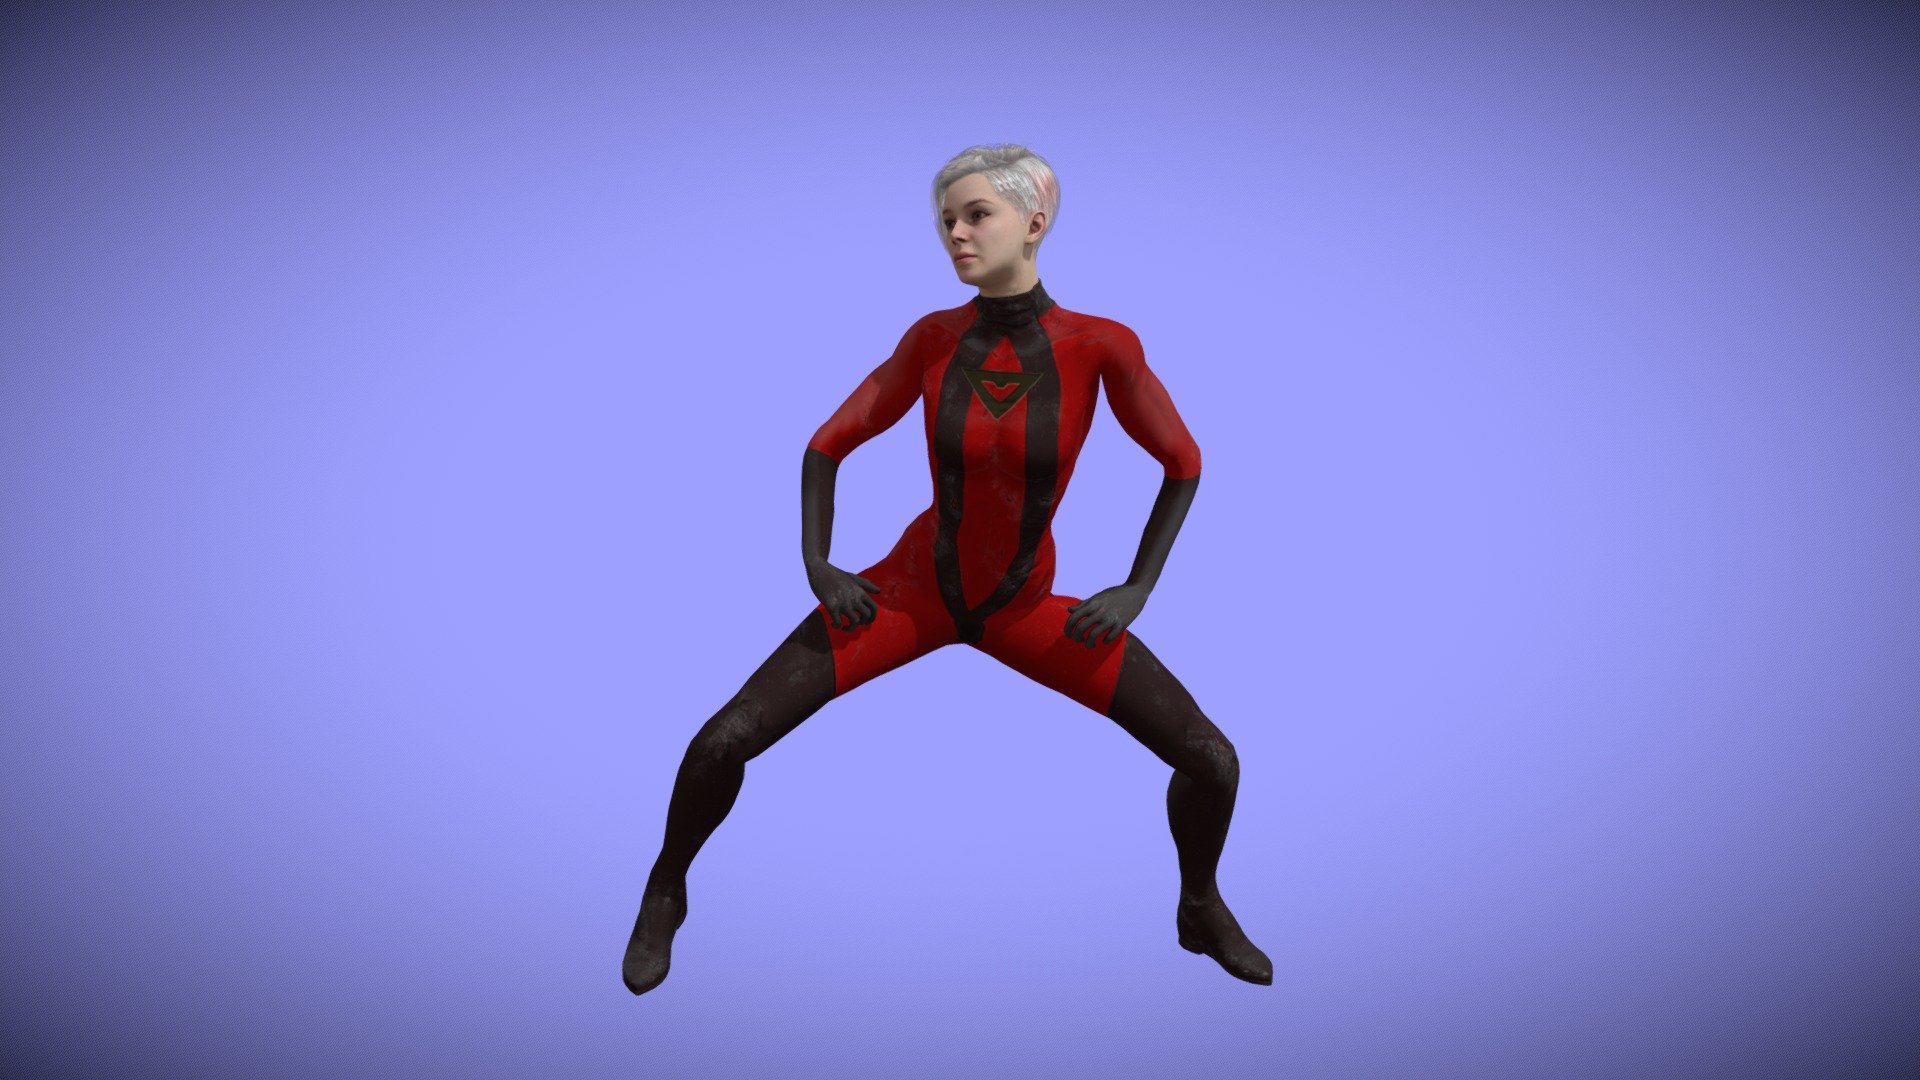 Female character wearing tight body suit dances the Twerk in this 21 second looping animation at 30 frames per second.

See this 3D model in AR Dance Teacher app - available on Google Play:

https://play.google.com/store/apps/details?id=com.ardanceteacher.app

It's easy! Simply download and install AR Dance Teacher app from Google Play, then choose a dance lesson by tapping on the button. Wait for the augmented reality dance instructor to load. Point your phone at the floor in front of you. Then tap the button to place the dance teacher on your floor. Move around the augmented reality dance teacher to study her moves from all angles. Get in closer to examine her dance technique. Listen to the beat of the spatial music. Then try the dance yourself. Augmented reality makes learning to dance fun and exciting 3d model